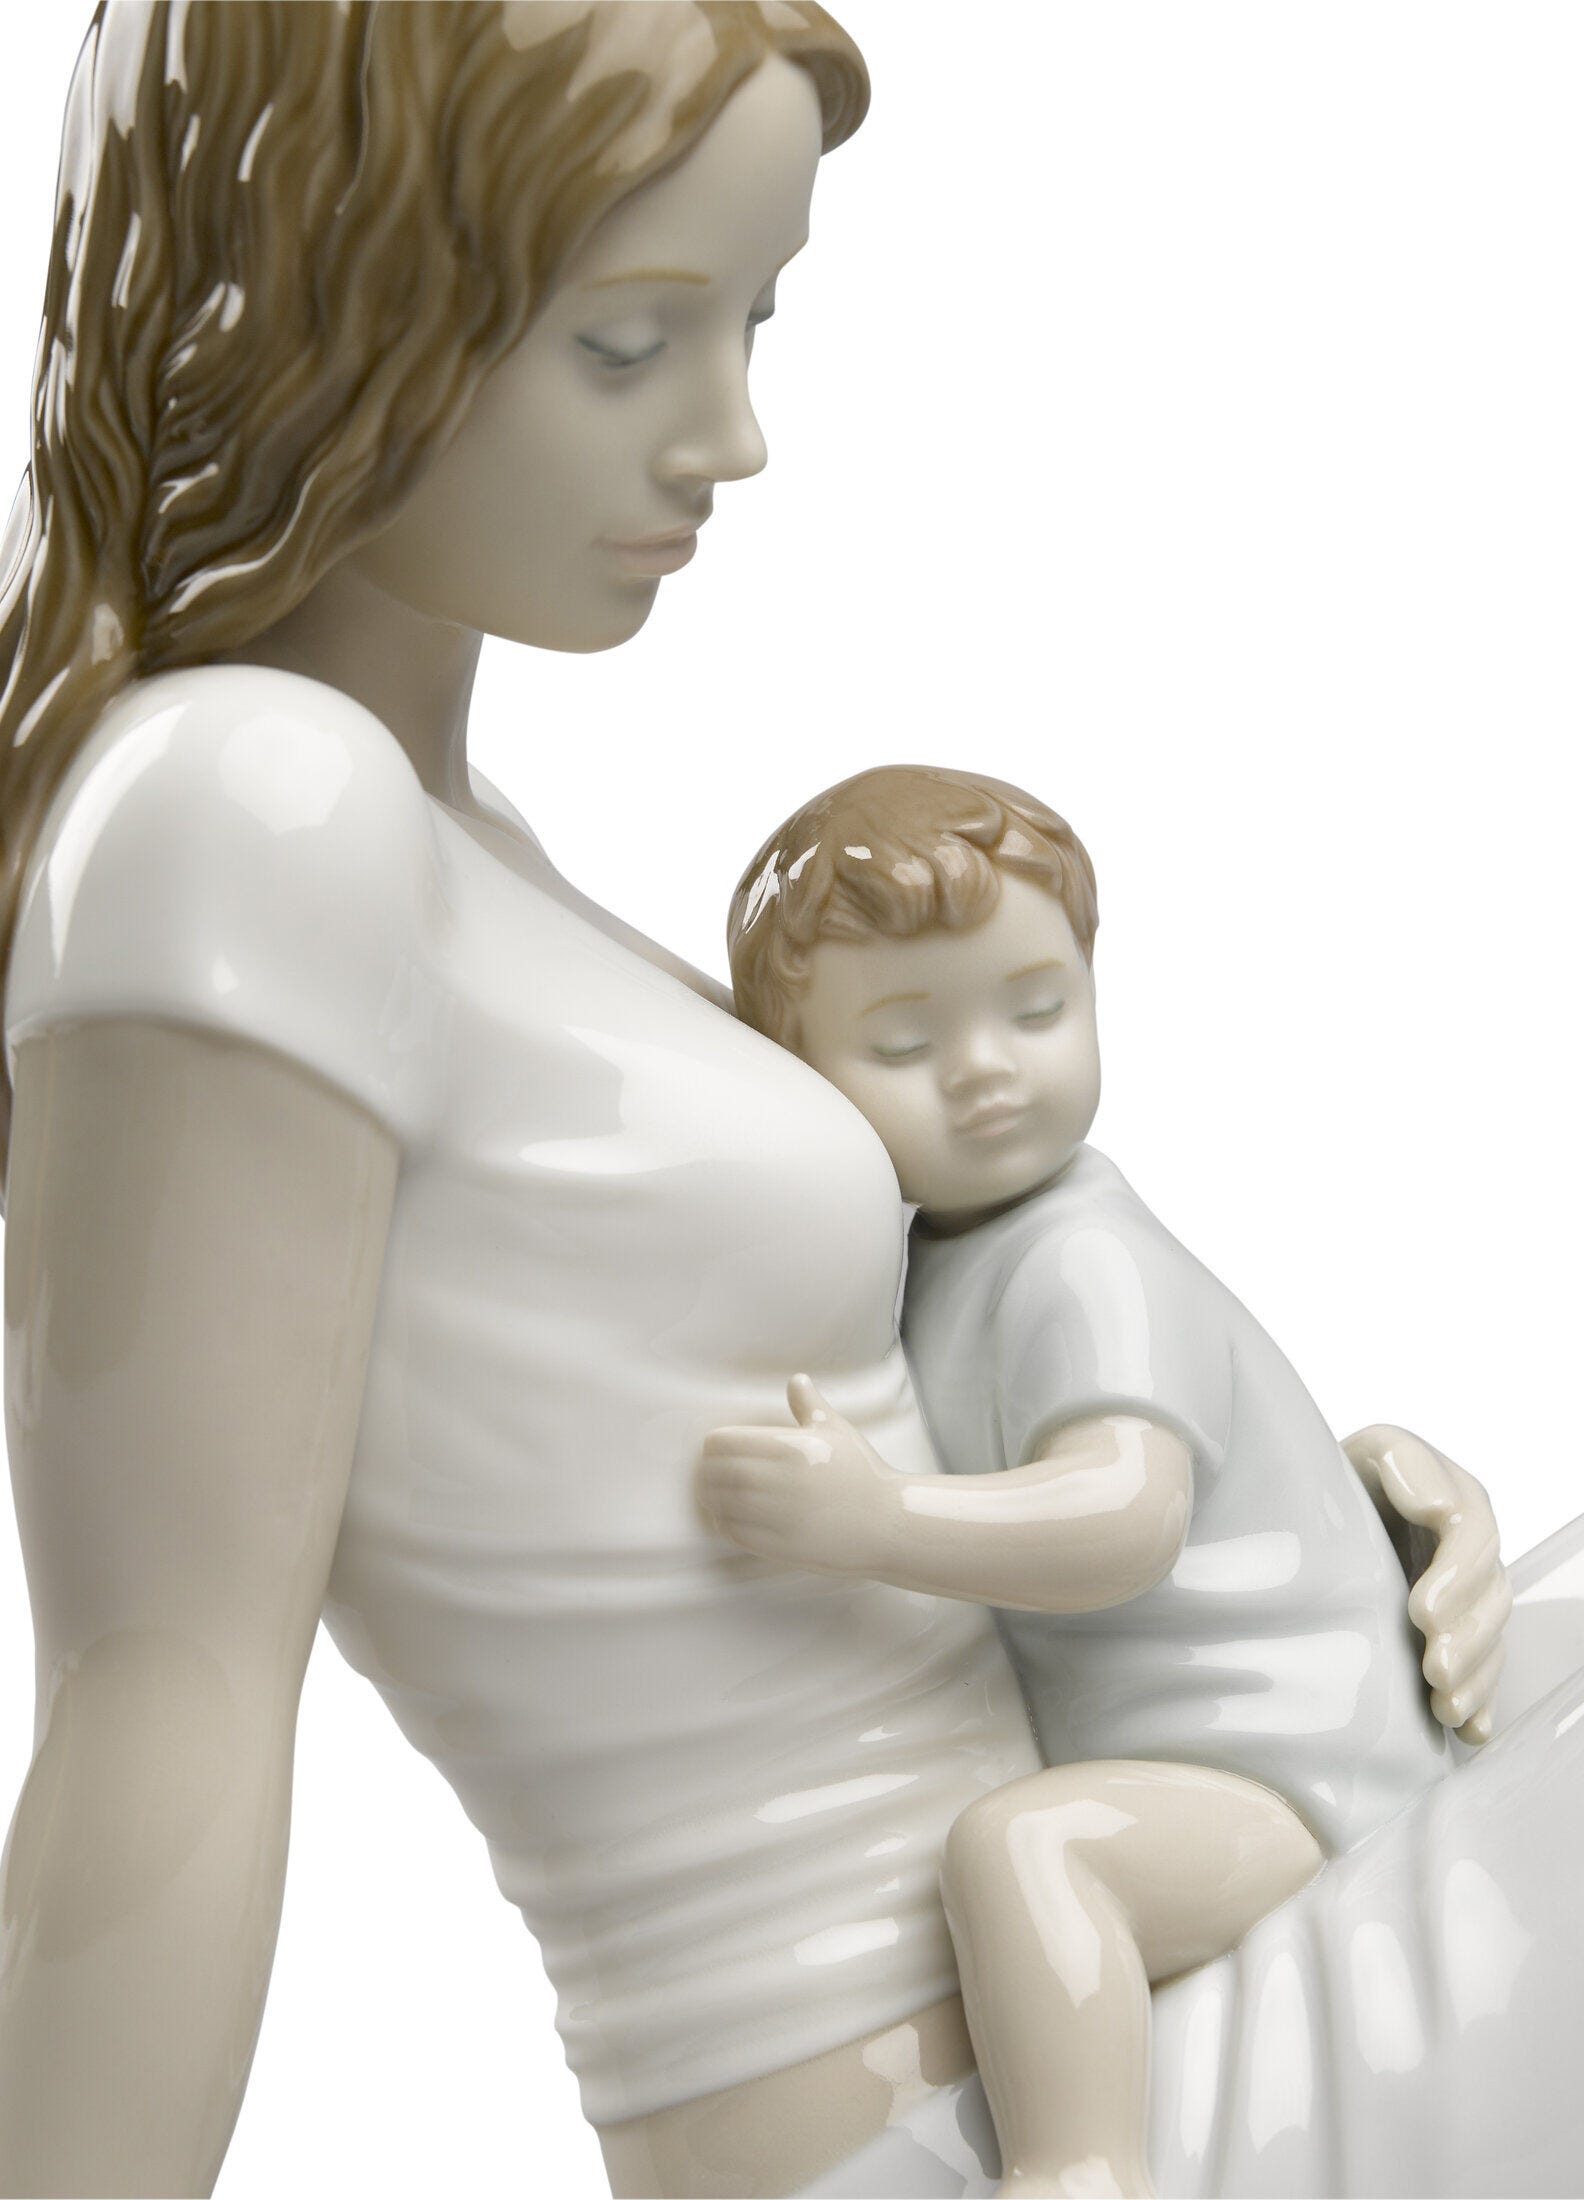 A mother's love Figurine Type 445 - Lladro-Europe